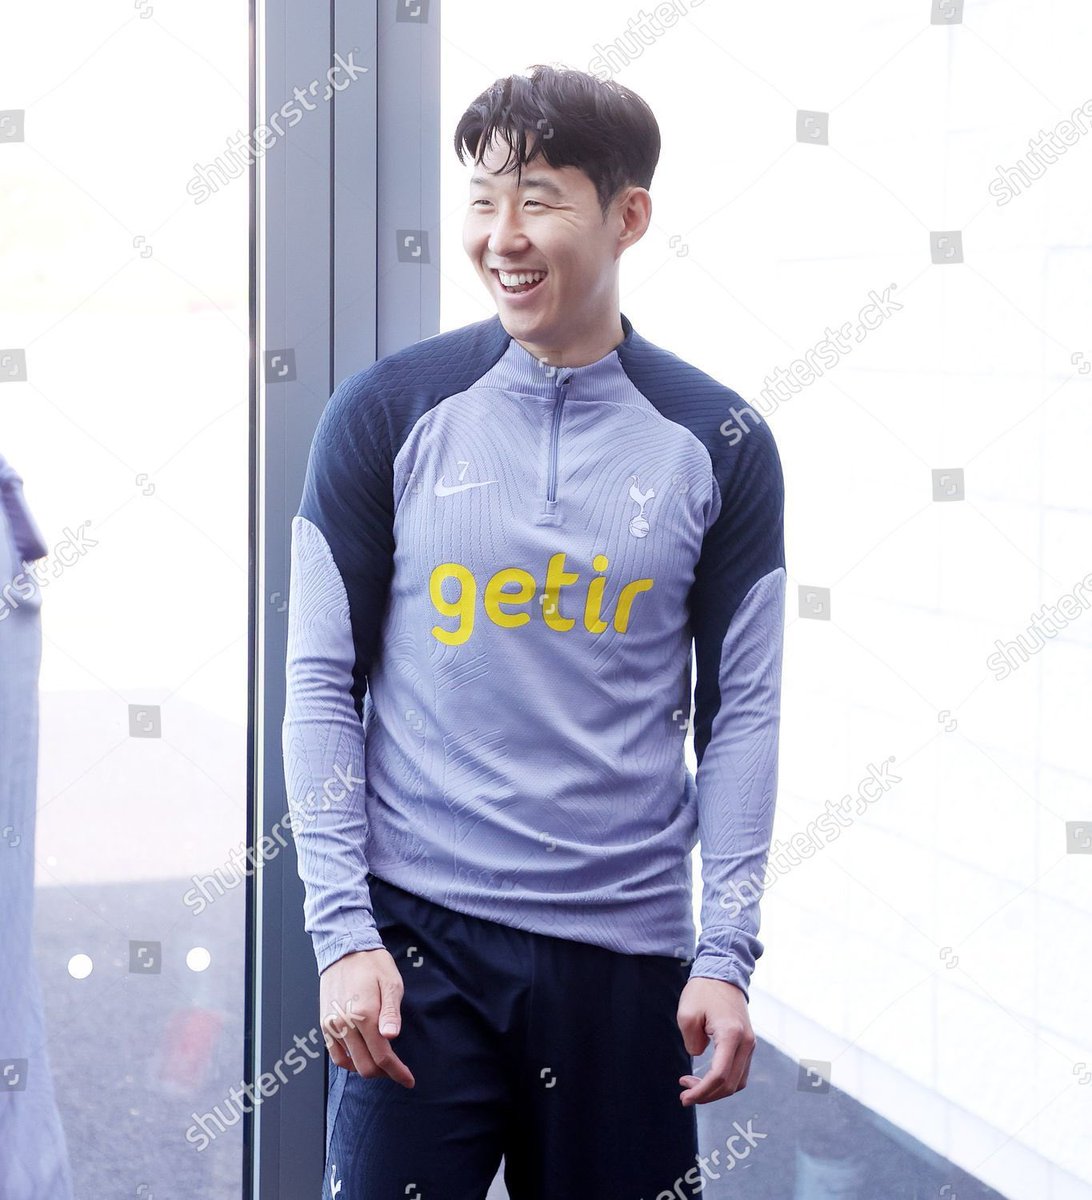 Sonny looks so happy in training today 🤍